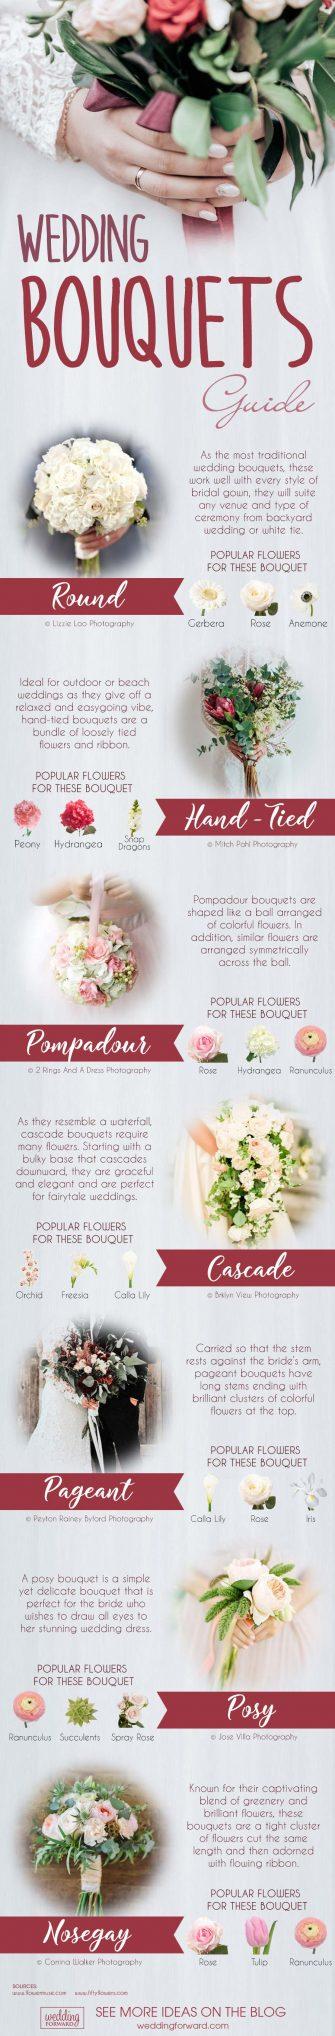 wedding flowers infographics wedding bouquets guide